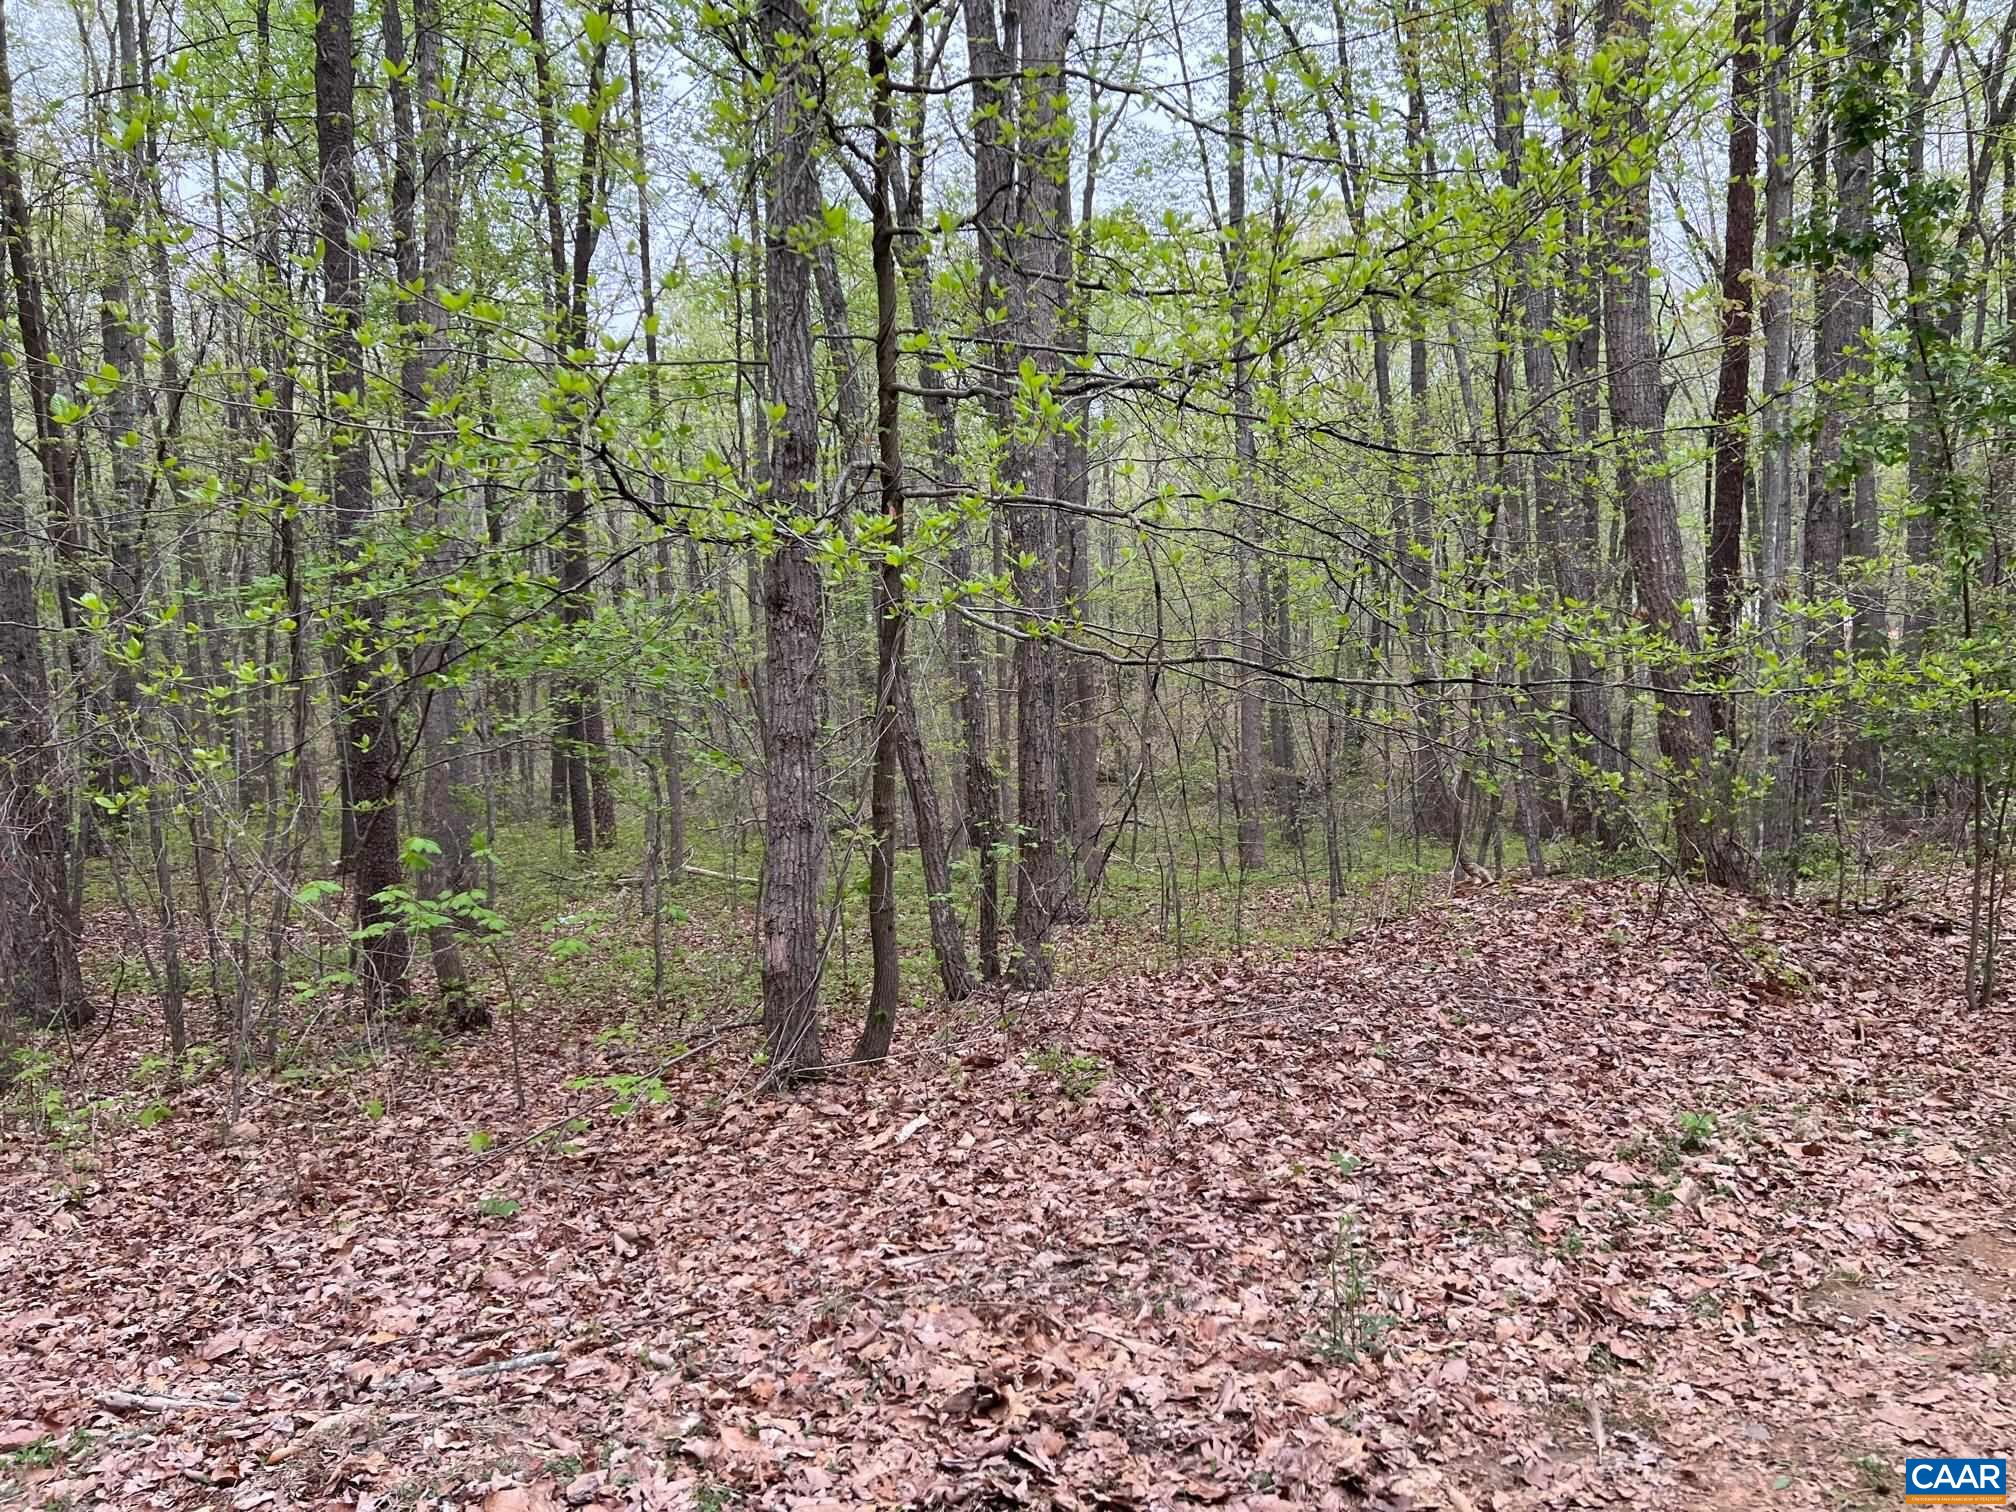 Priced to sell! Lovely wooded home site between Gordonsville & Trevilians.  Prime location with short drive to Lake Anna, Louisa, Gordonsville or Charlottesville.  Escape to the woods and build your dream home!  Enjoy low Louisa County real estate taxes! Lot is on the left.  Do no go to house at 132 Briar Patch Lane even though Louisa County GIS has this address for the lot.